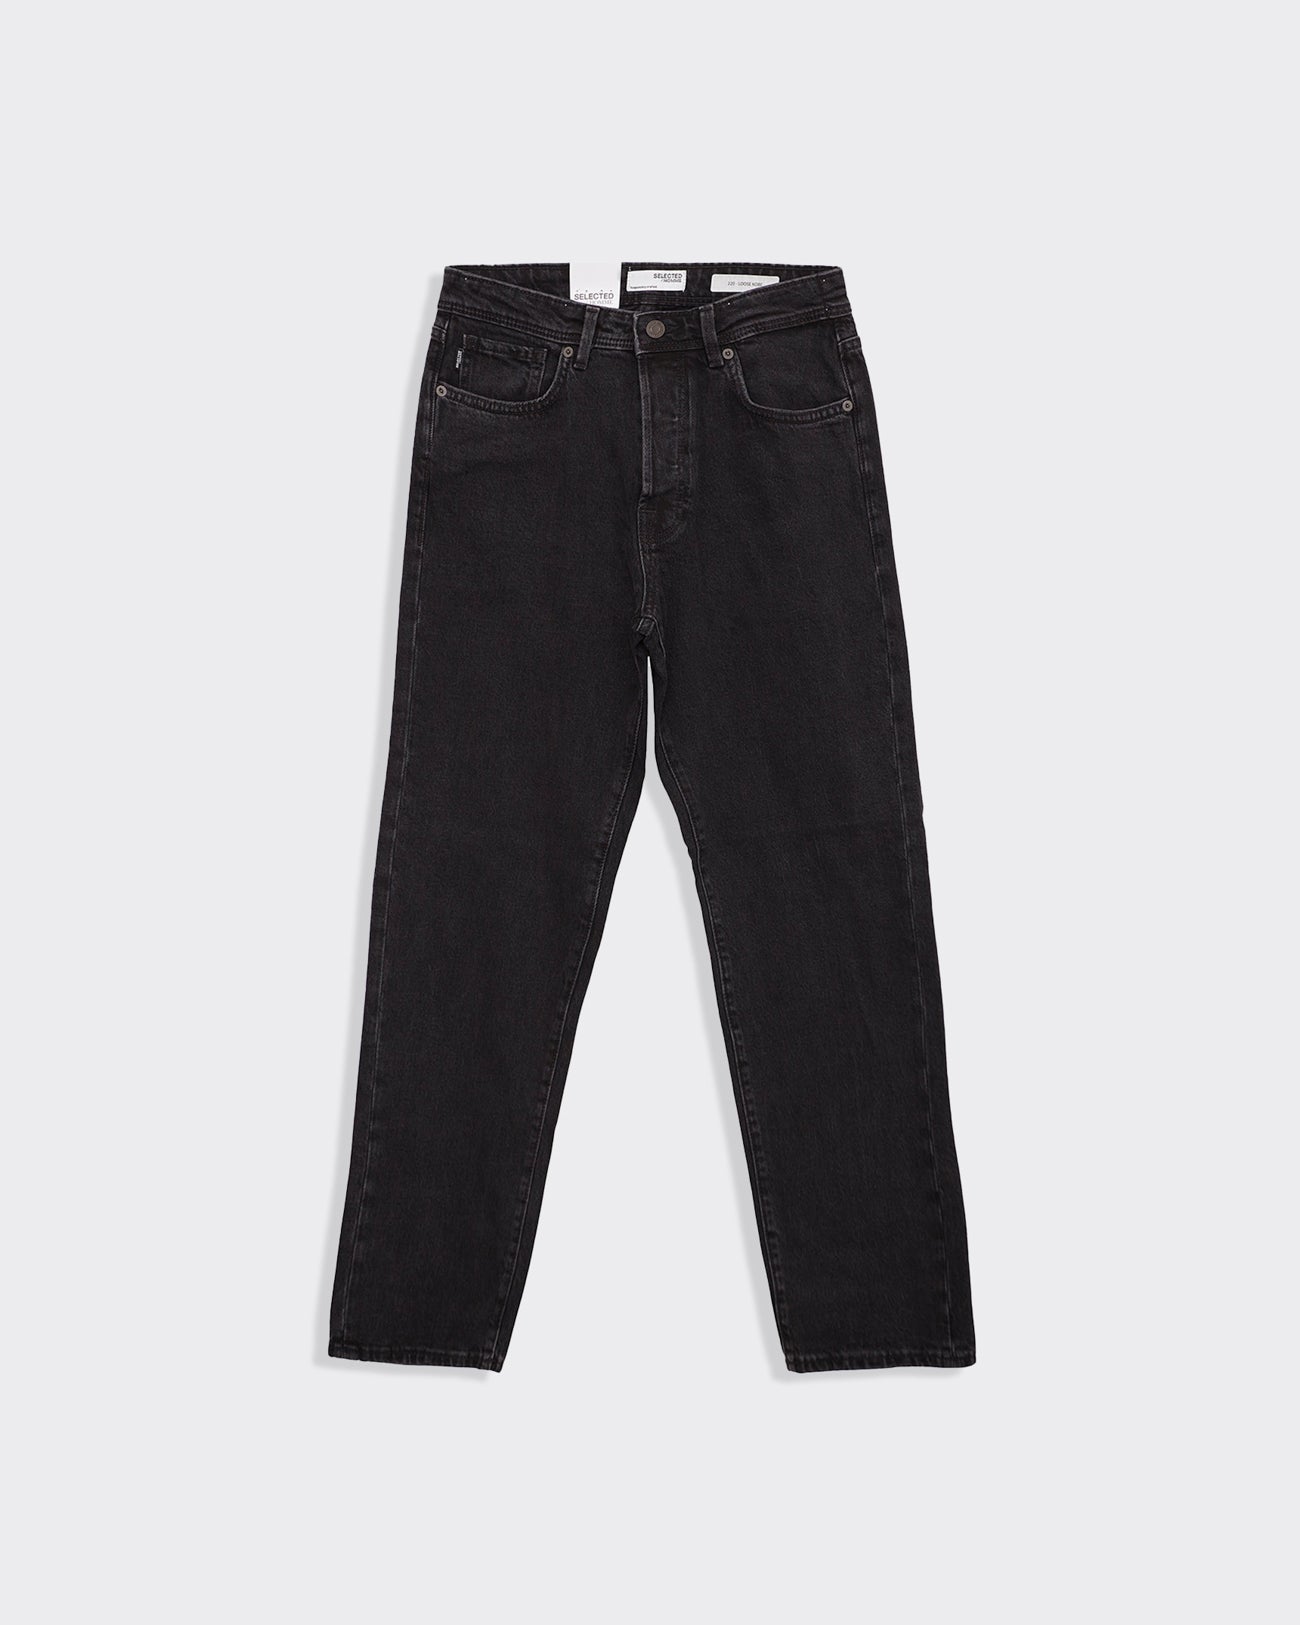 Image of Selected Homme Jeans Wide Kobe Nero in Cotone